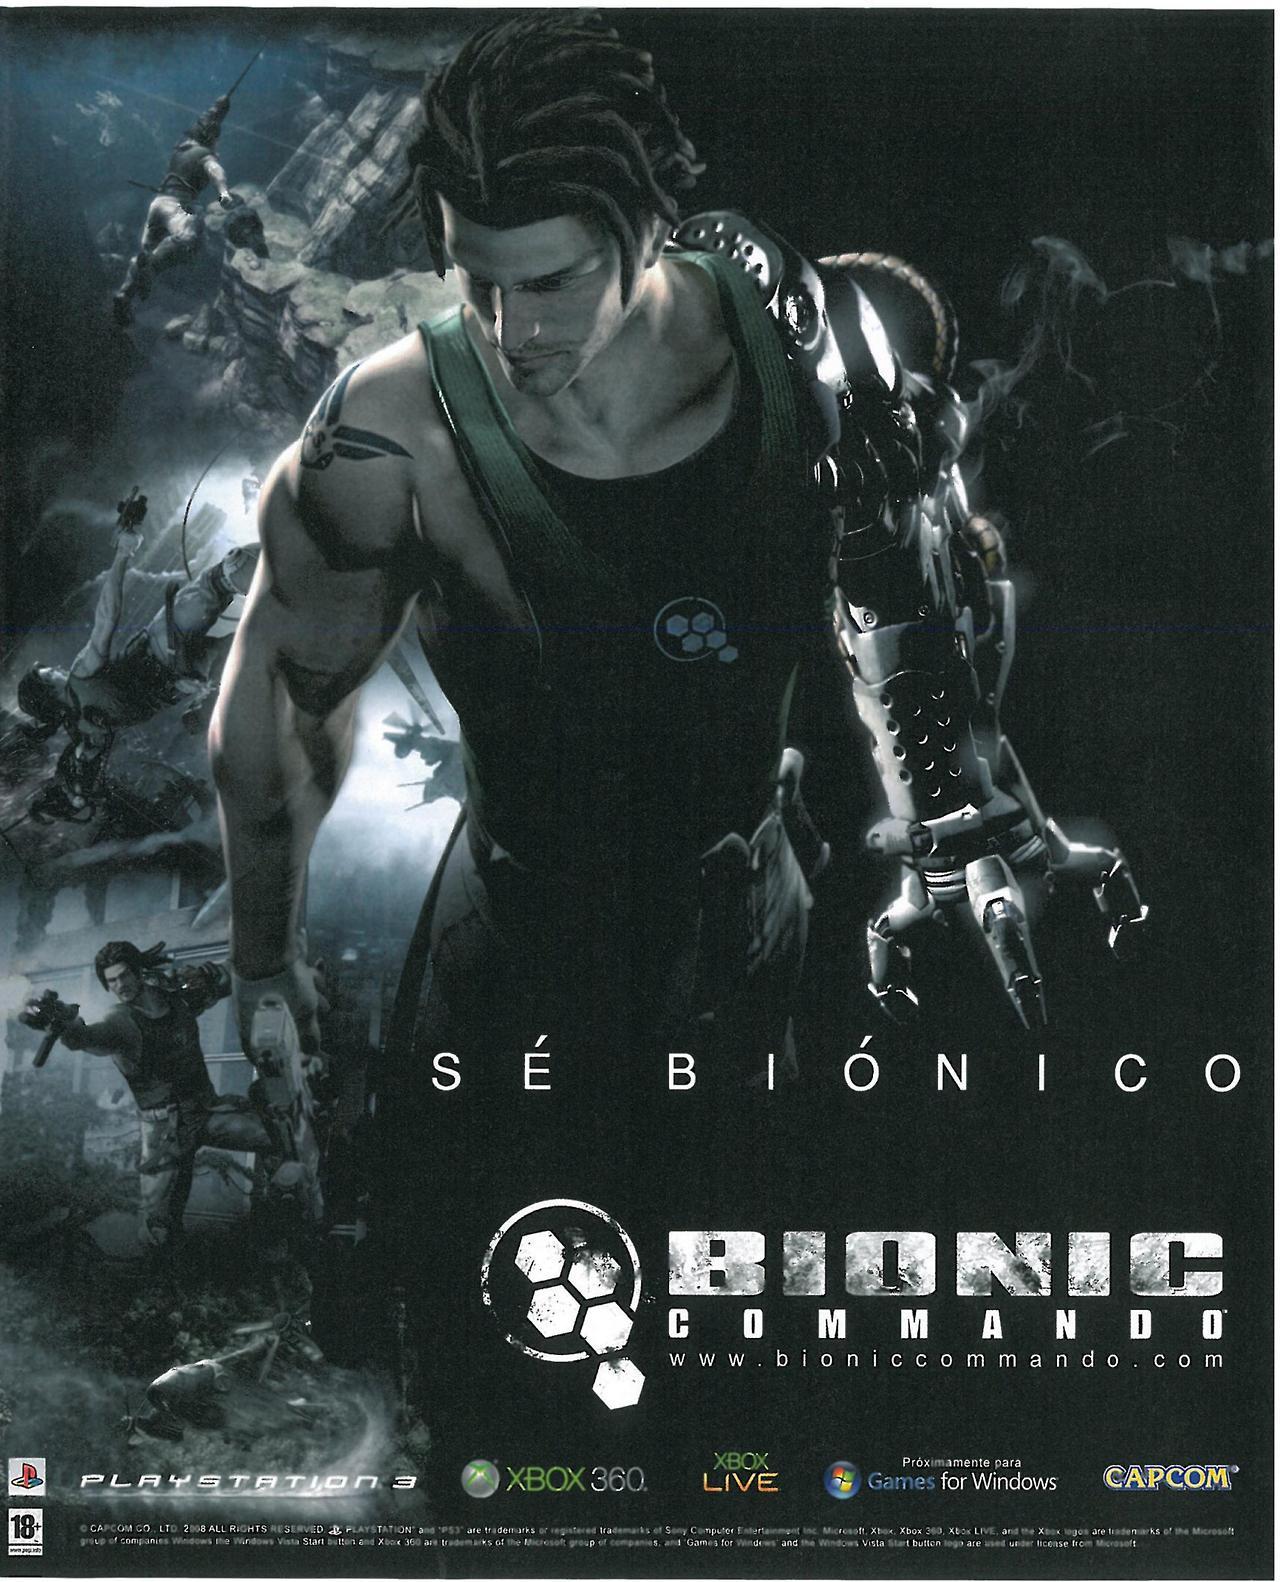 ‘Bionic Commando’[PC / PS3 / X360] [SPAIN] [MAGAZINE] [2009]
• Official Xbox 360 Magazine (ES), June 2009 (#31)
• Scanned / Uploaded by Sketch the Cow, via The Internet Archive